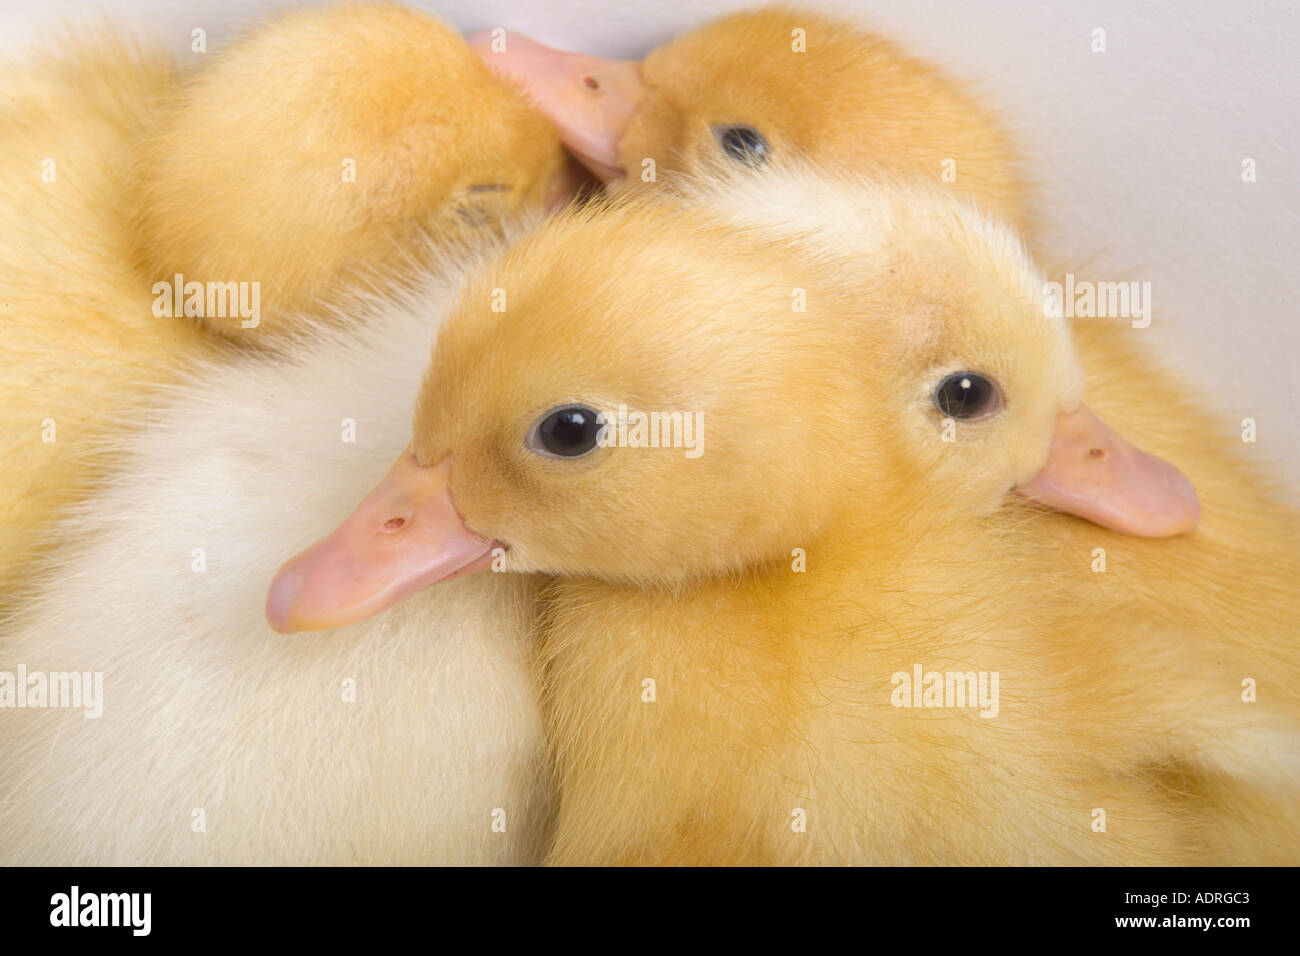 Newly Hatched Ducklings in Closeup Stock Photo